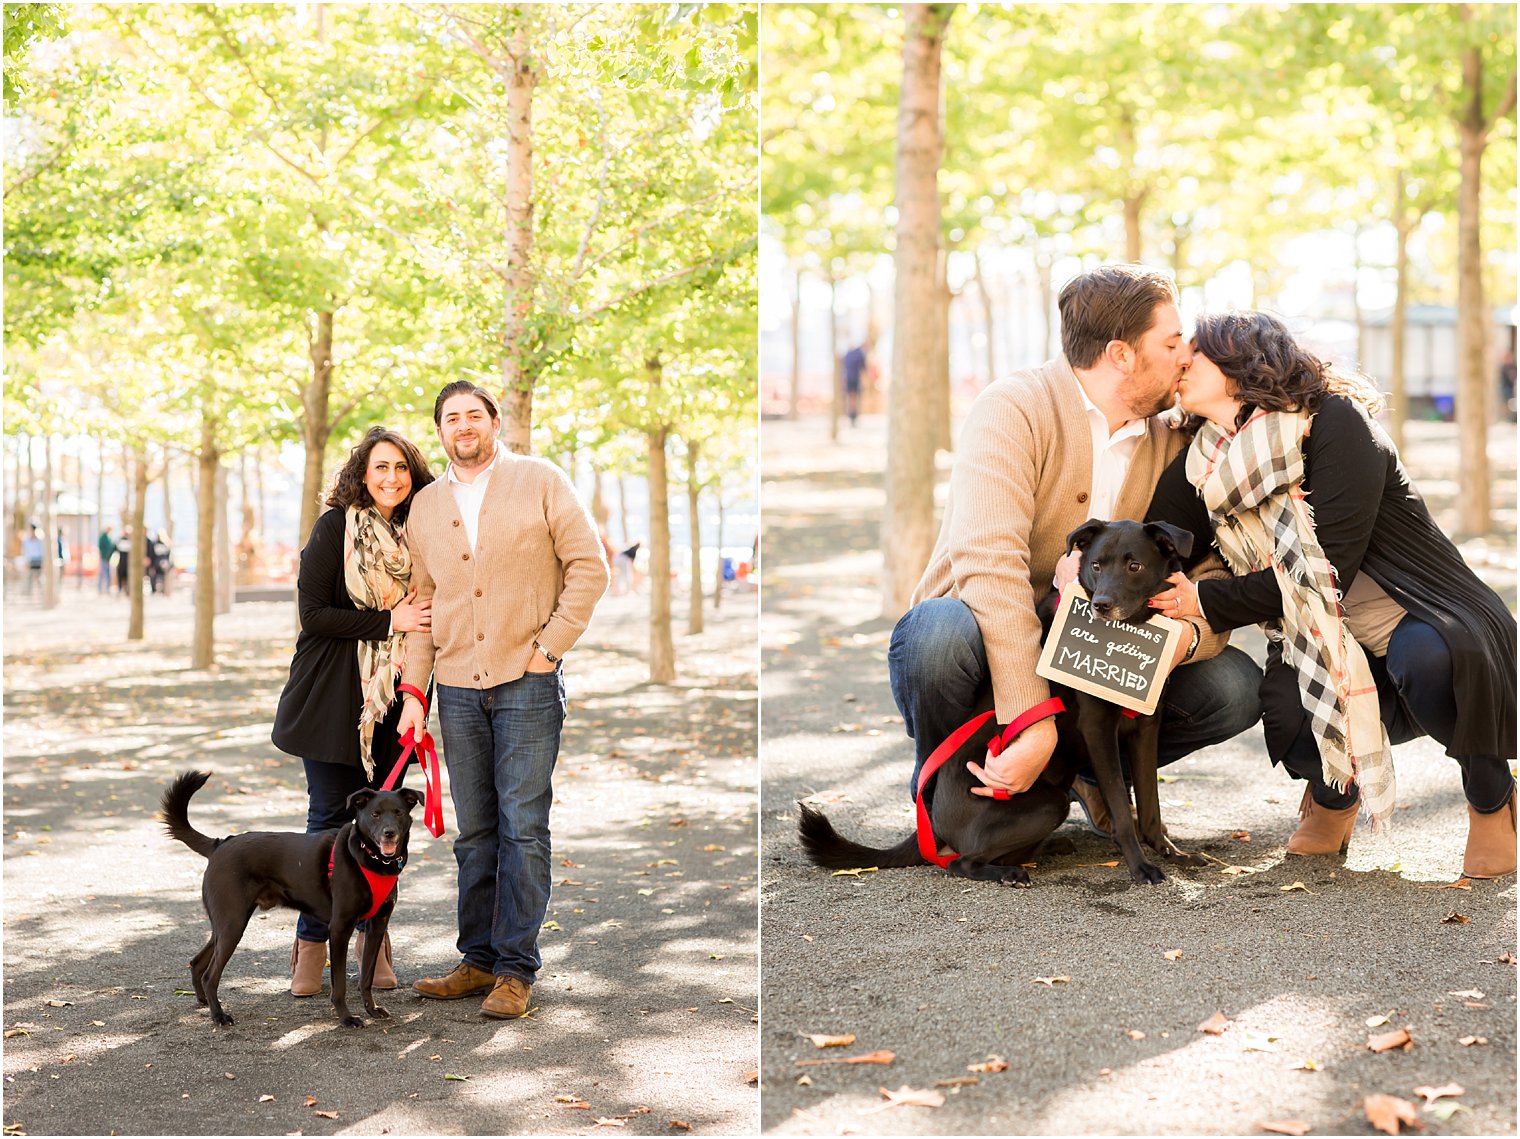 Engagement session ideas with dog